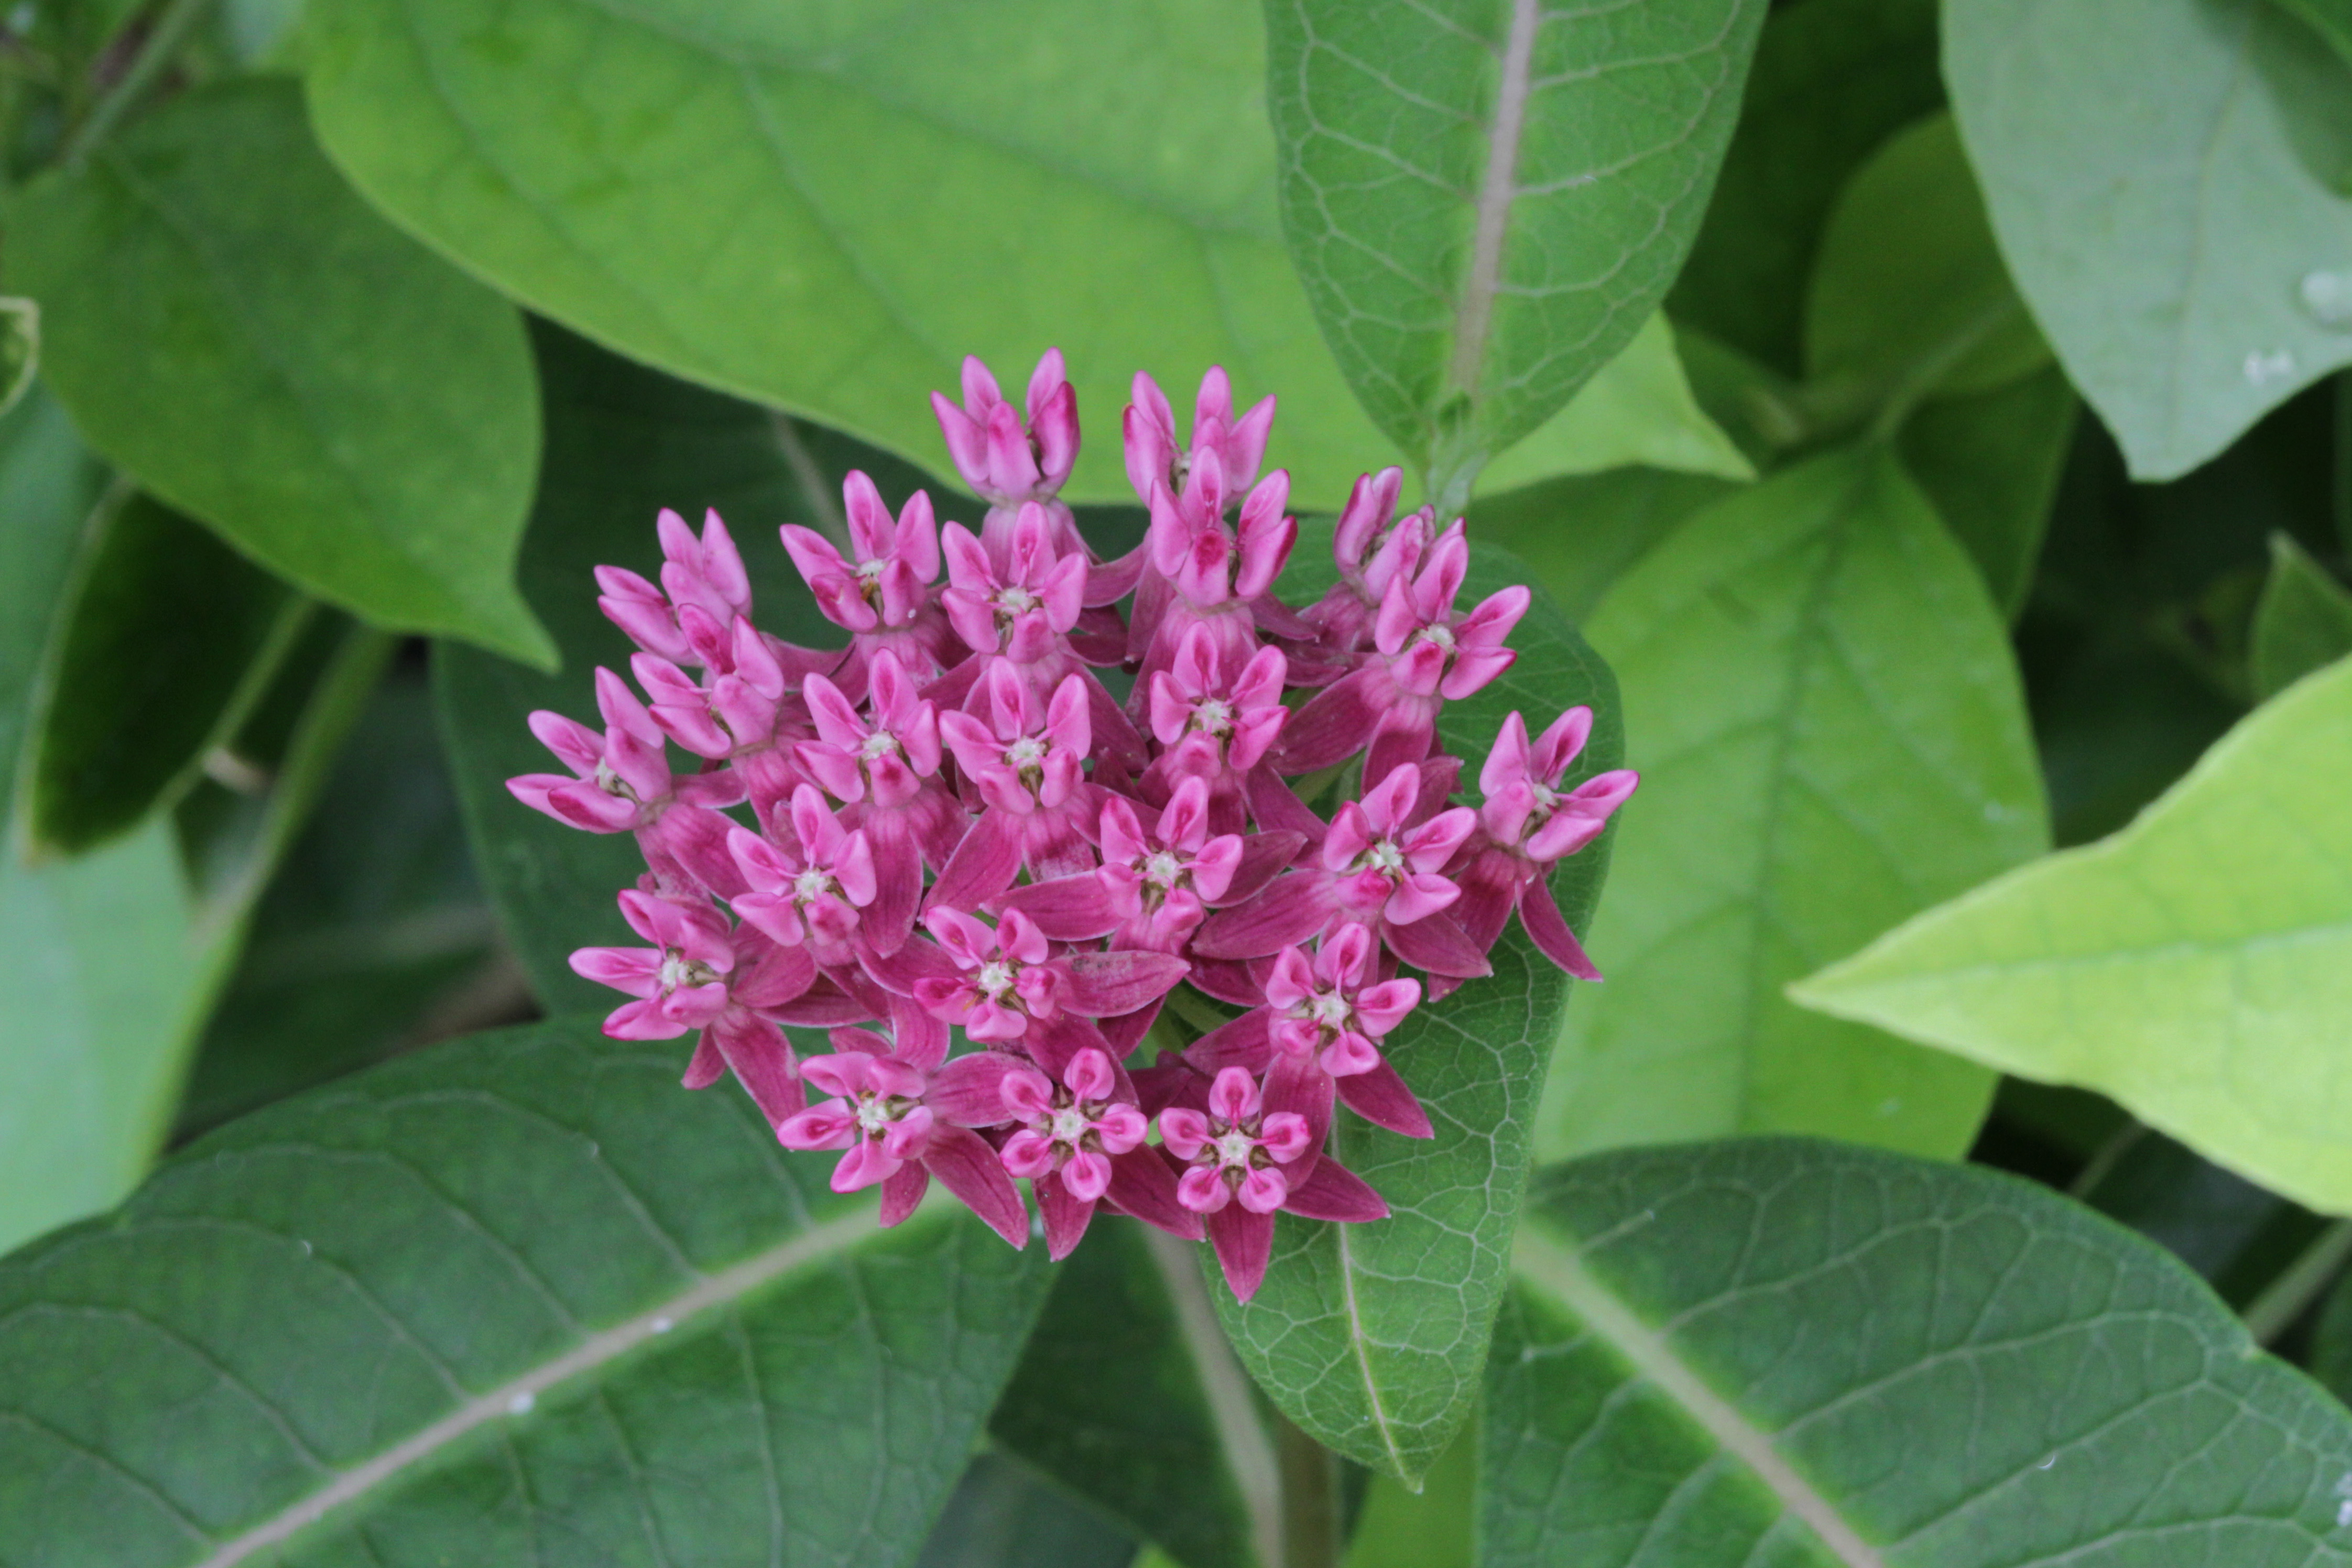 The Scientific Name is Asclepias purpurascens. You will likely hear them called Purple Milkweed. This picture shows the Purple Milkweed blossoms  and leaves.  This photograph from the Courtyard Gardens at the North Carolina Botanical Garden. of Asclepias purpurascens